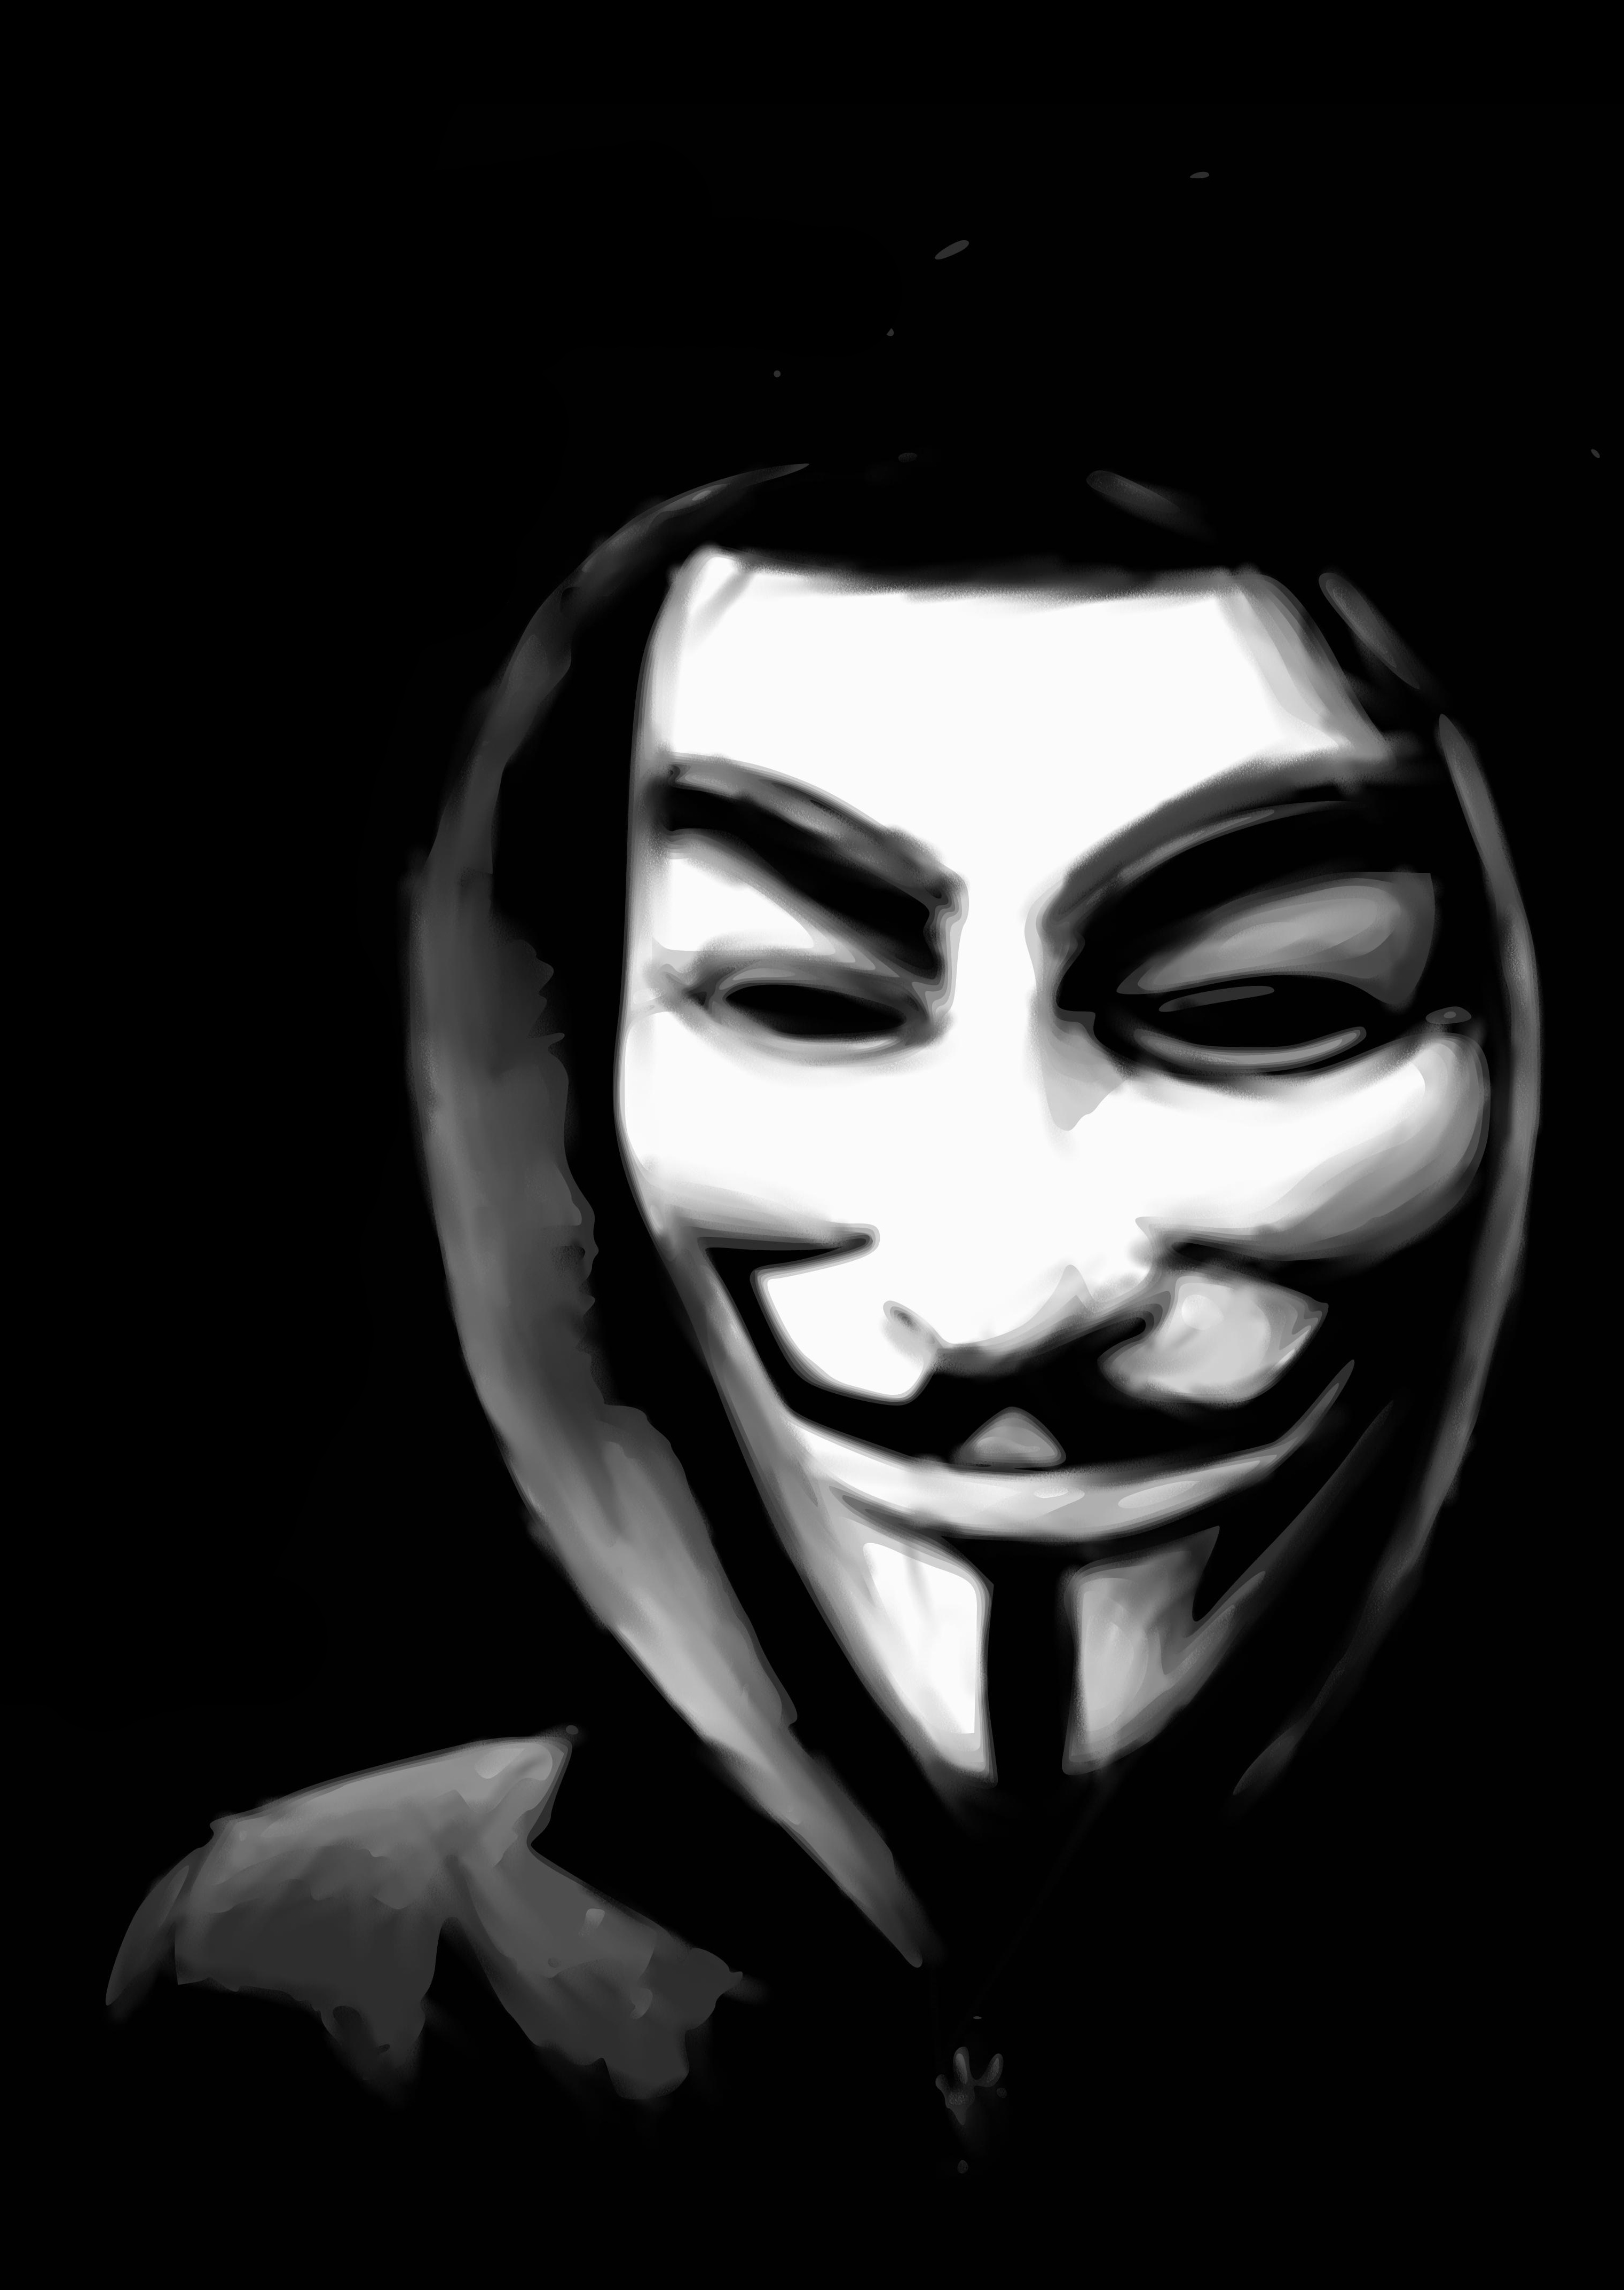 21917 Screensavers and Wallpapers V For Vendetta for phone. Download art photo, cinema, v for vendetta, black pictures for free